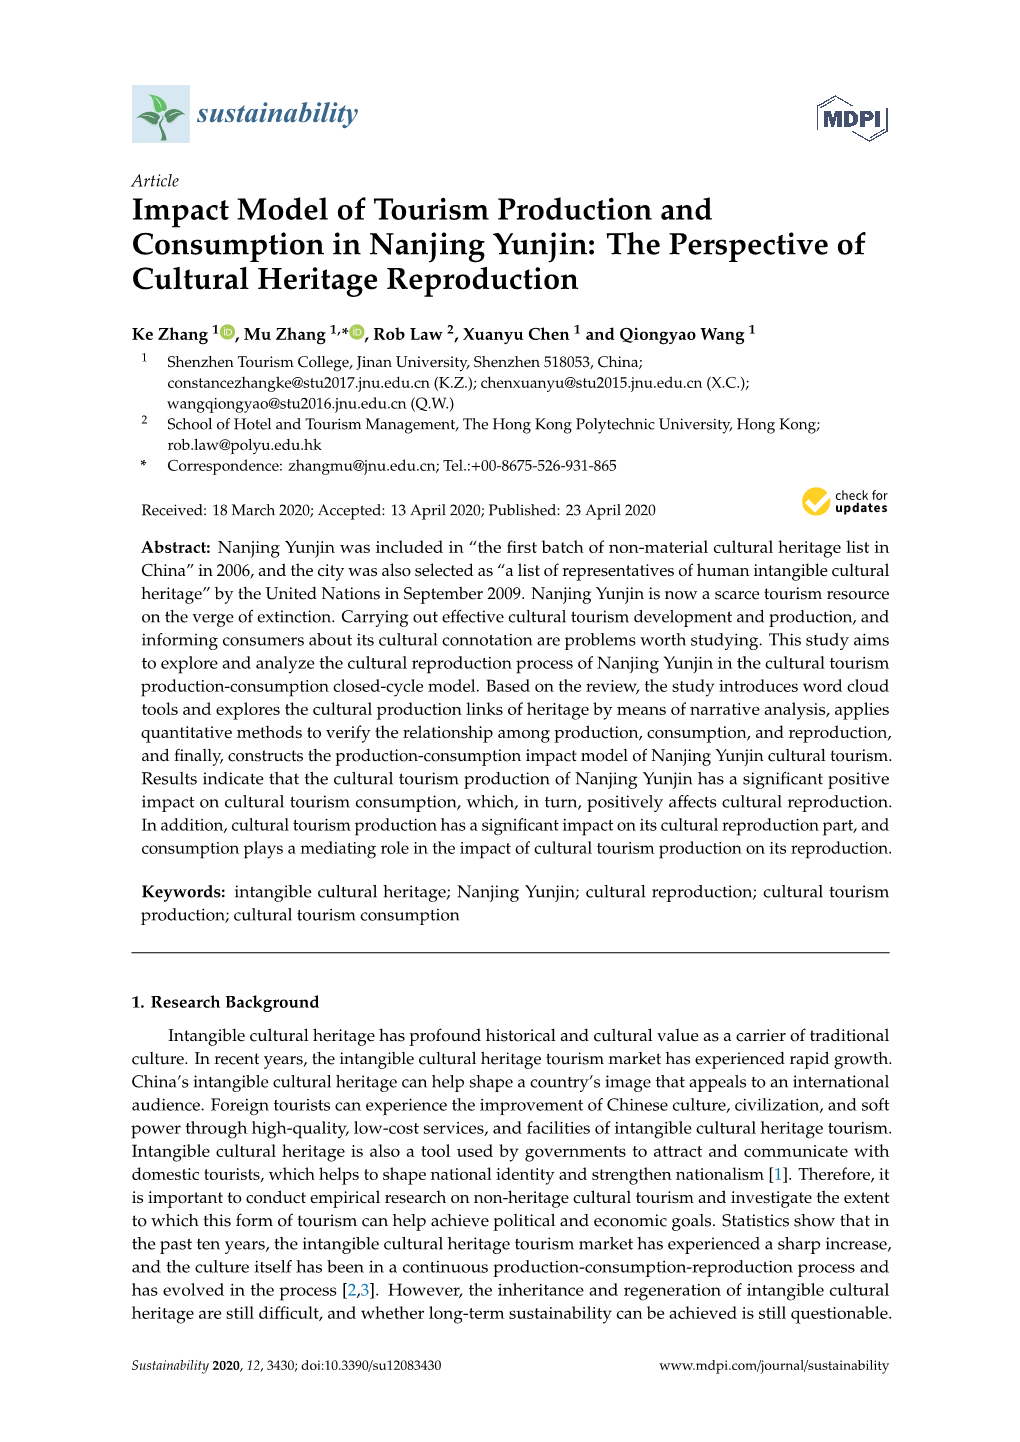 Impact Model of Tourism Production and Consumption in Nanjing Yunjin: the Perspective of Cultural Heritage Reproduction